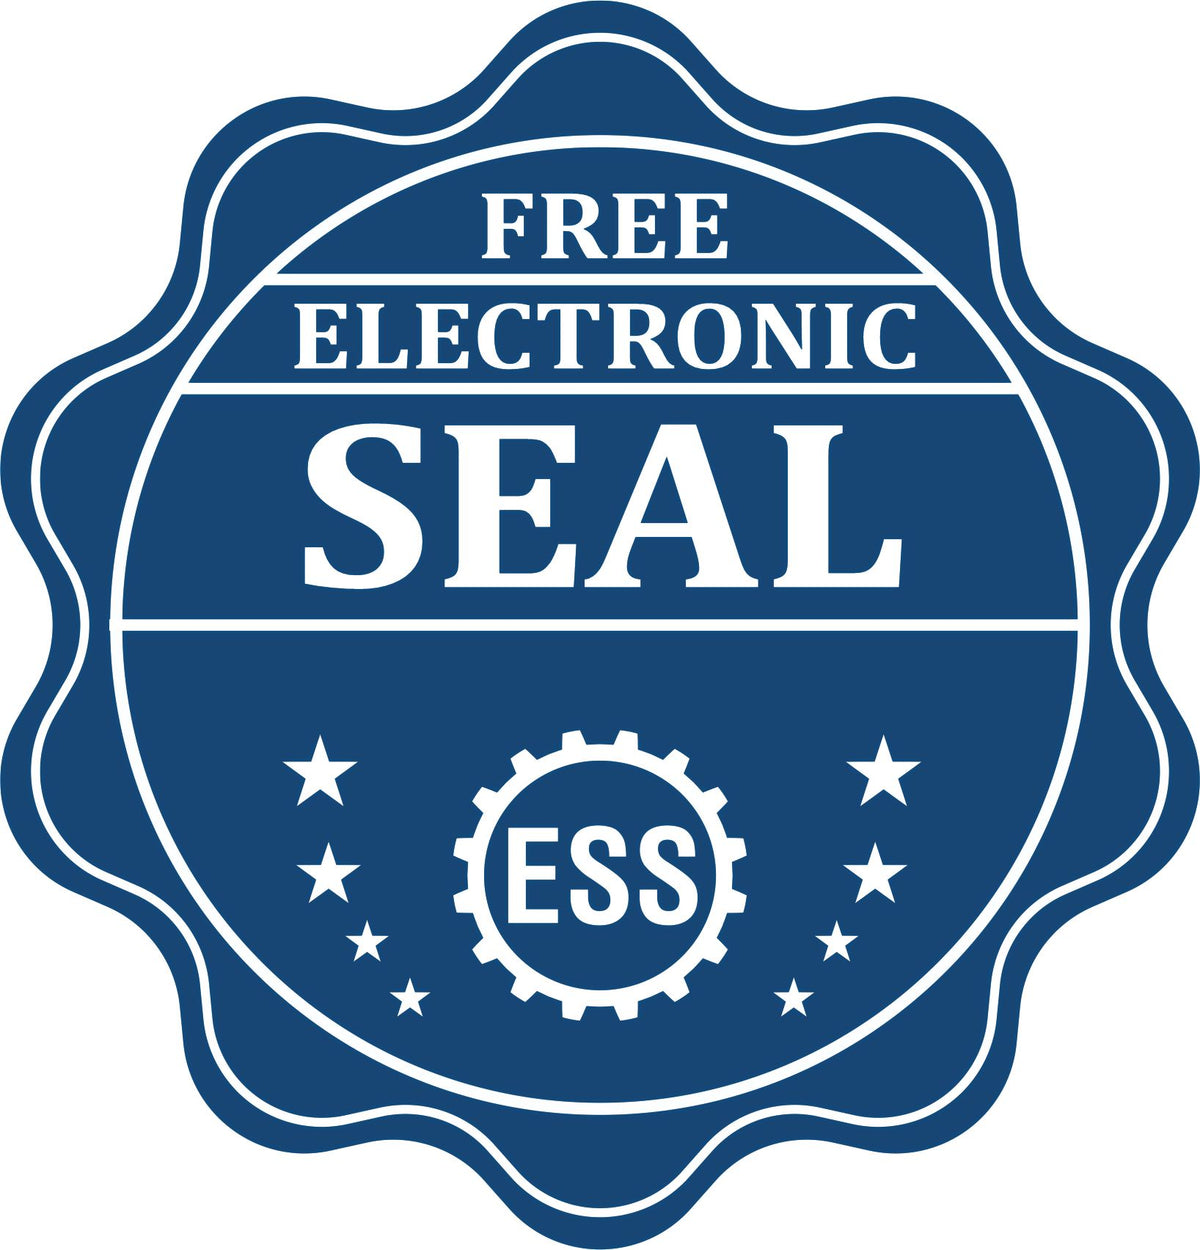 A badge showing a free electronic seal for the Arizona Professional Engineer Seal Stamp with stars and the ESS gear on the emblem.